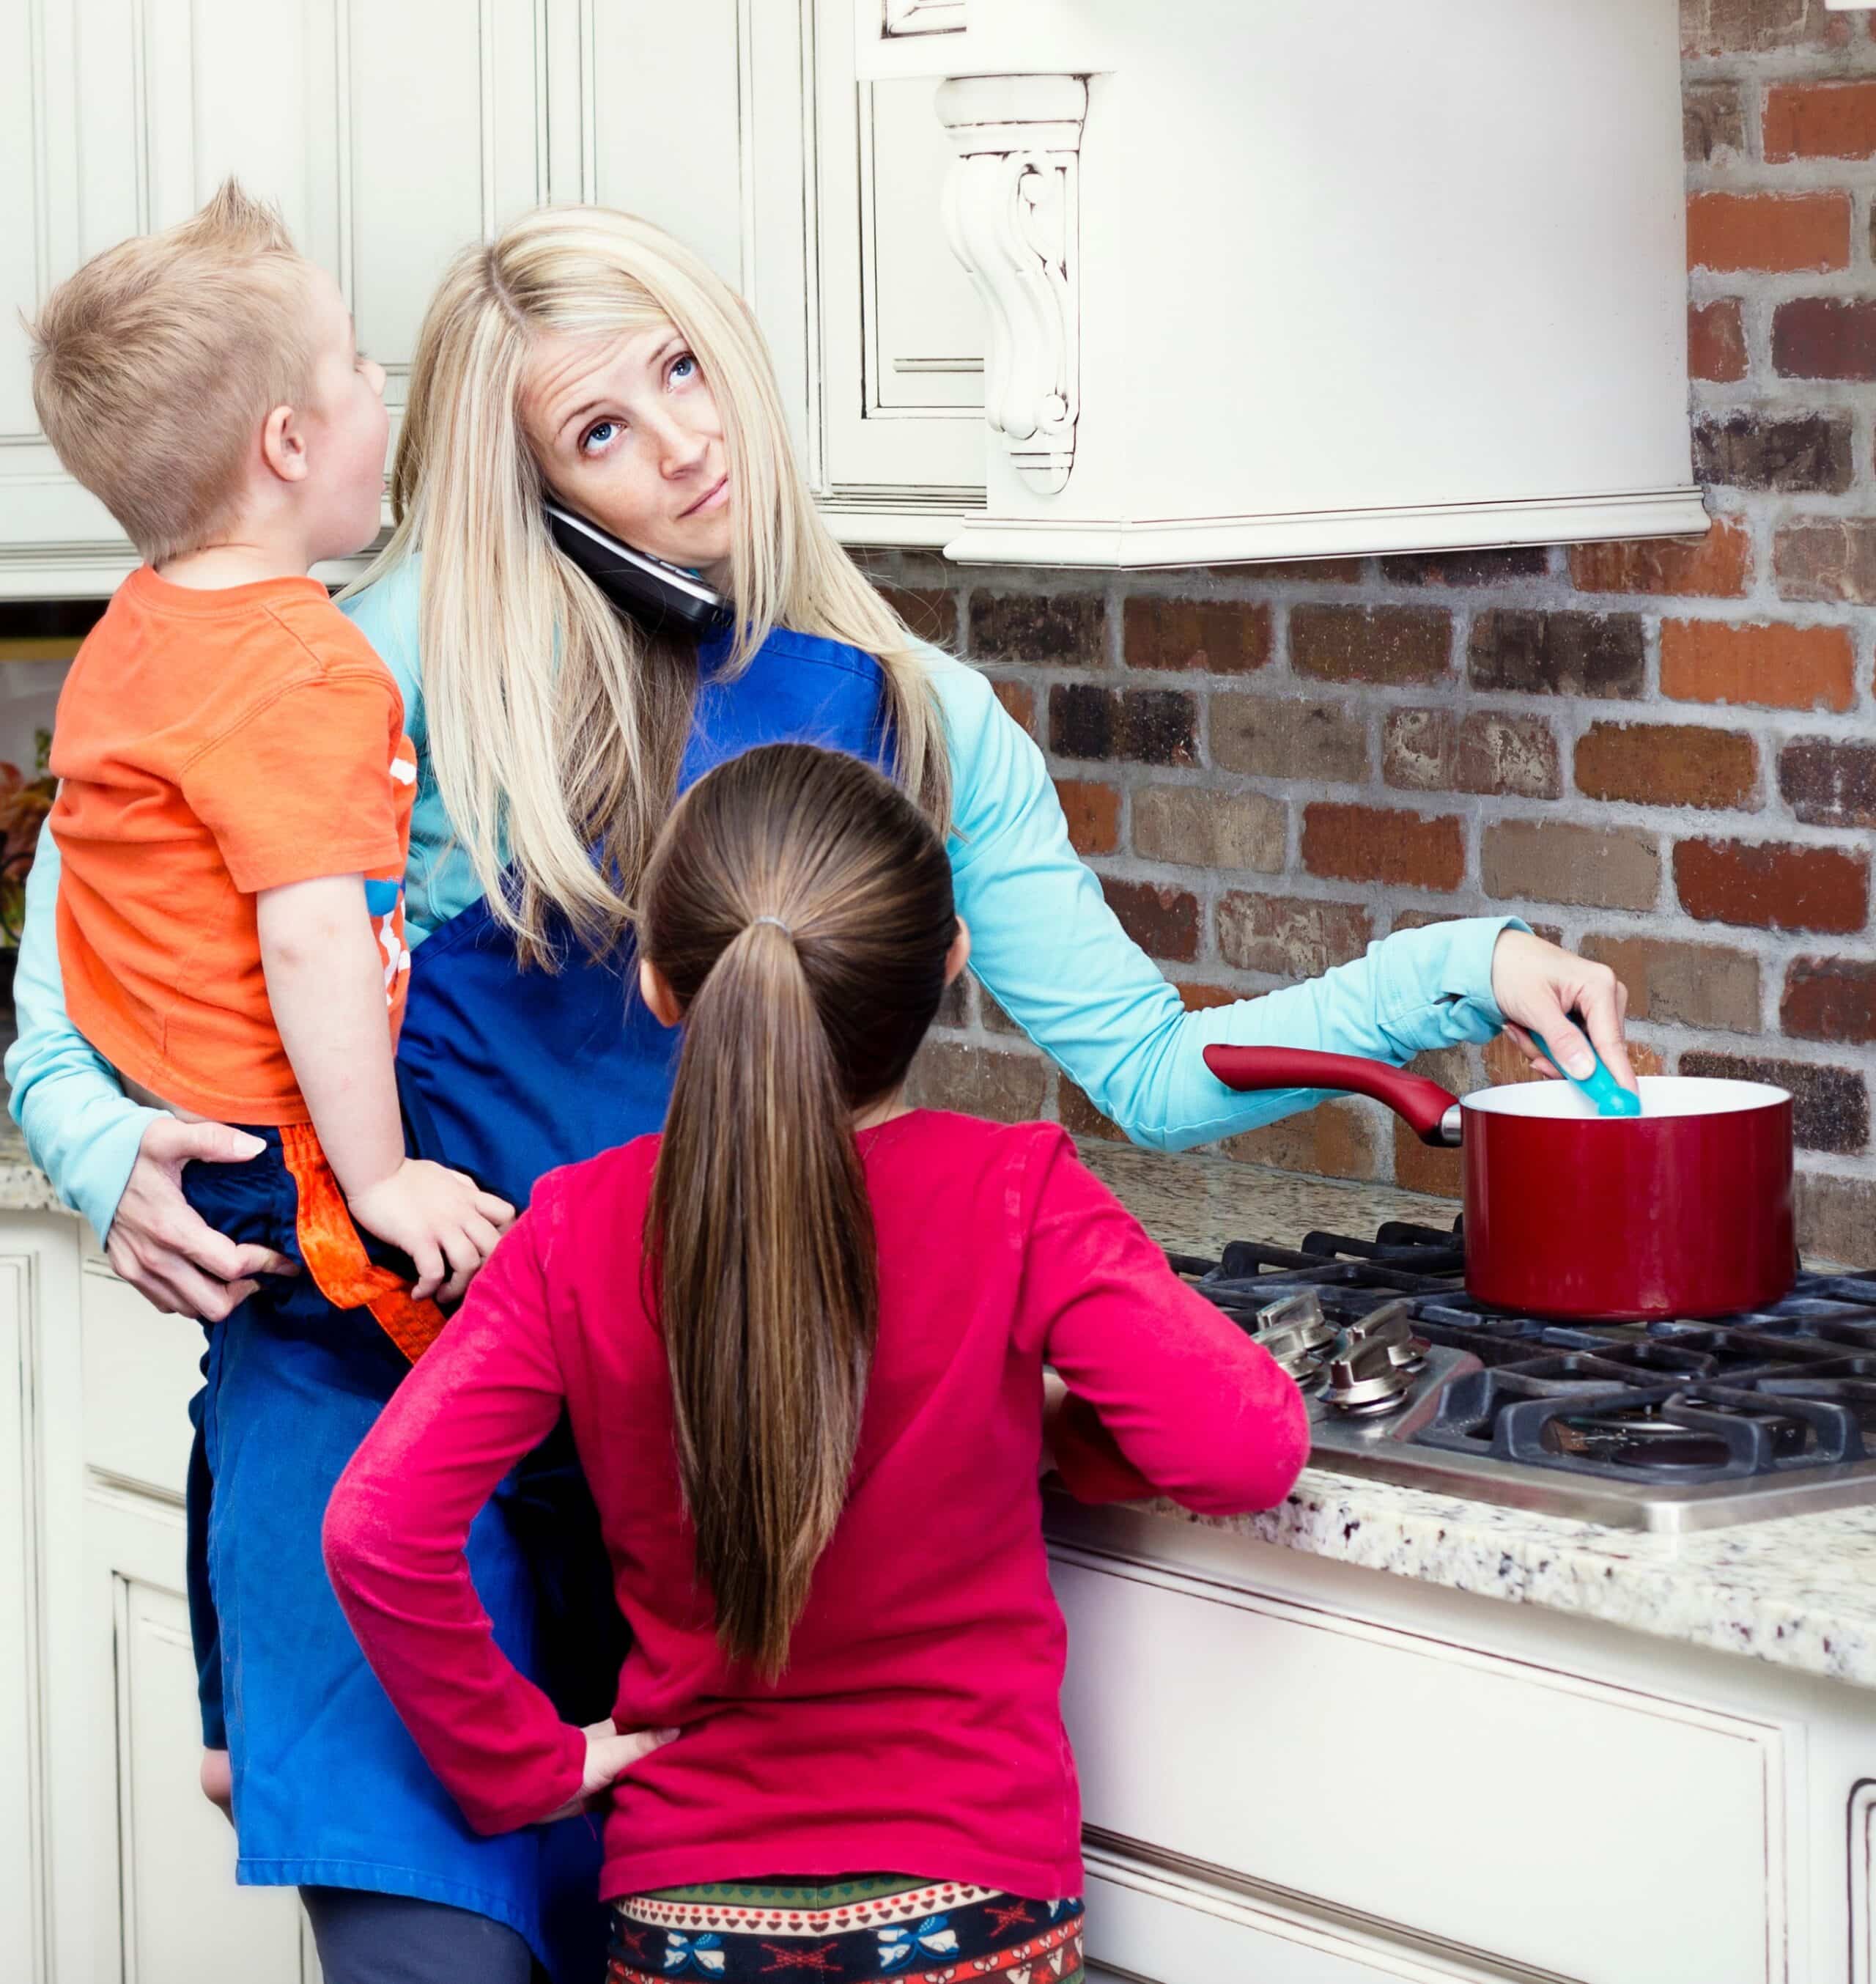 A Reality Cooking Show for Homeschool Moms